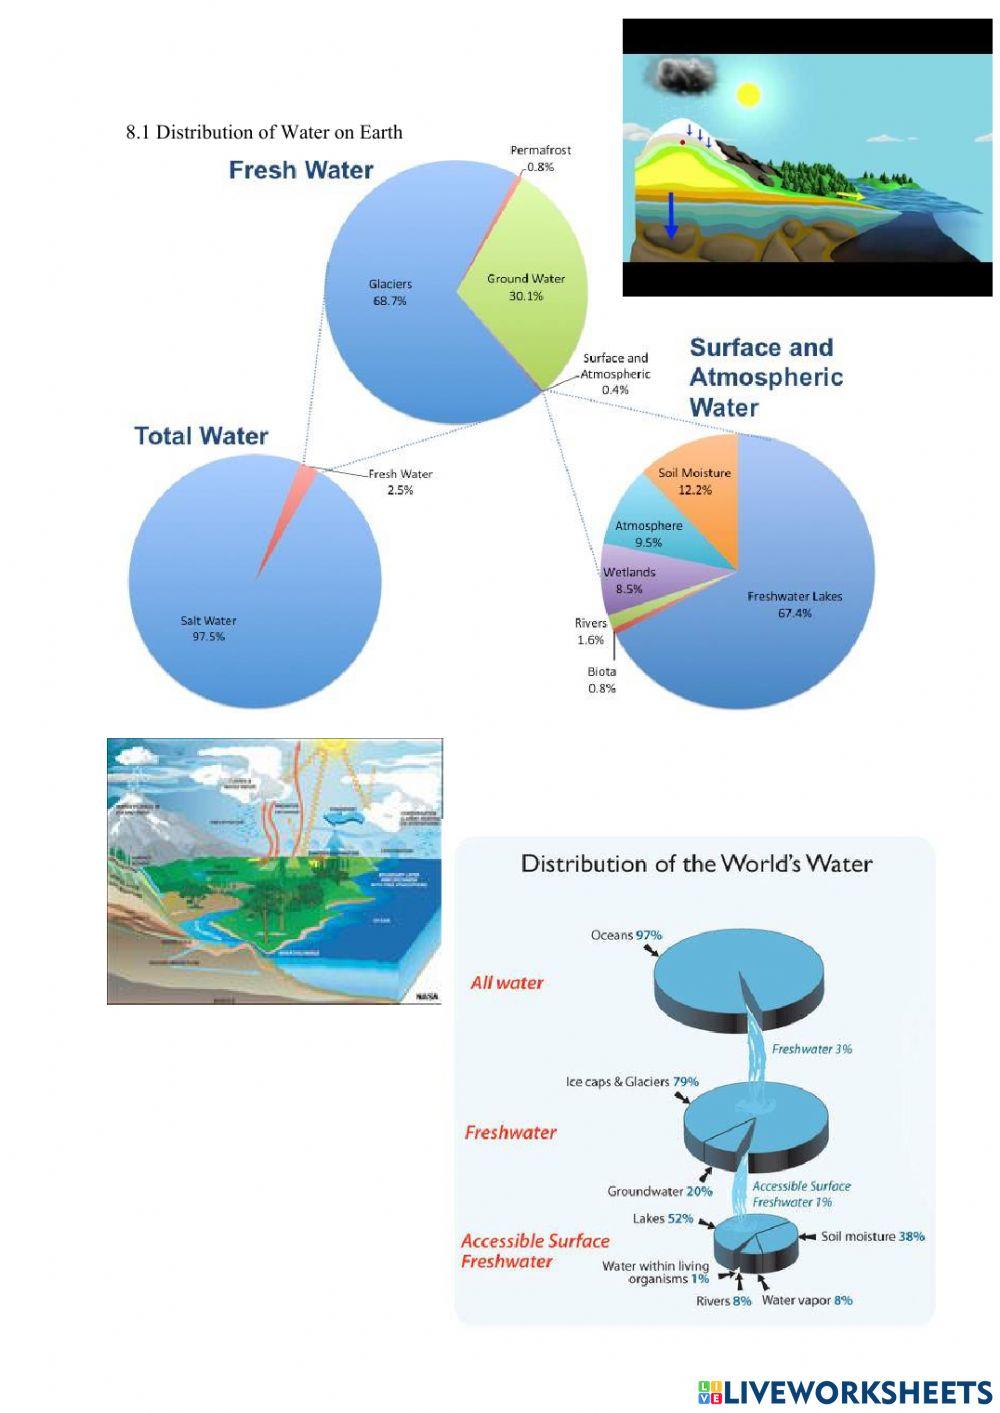 8.1 Distribution of Water on Earth